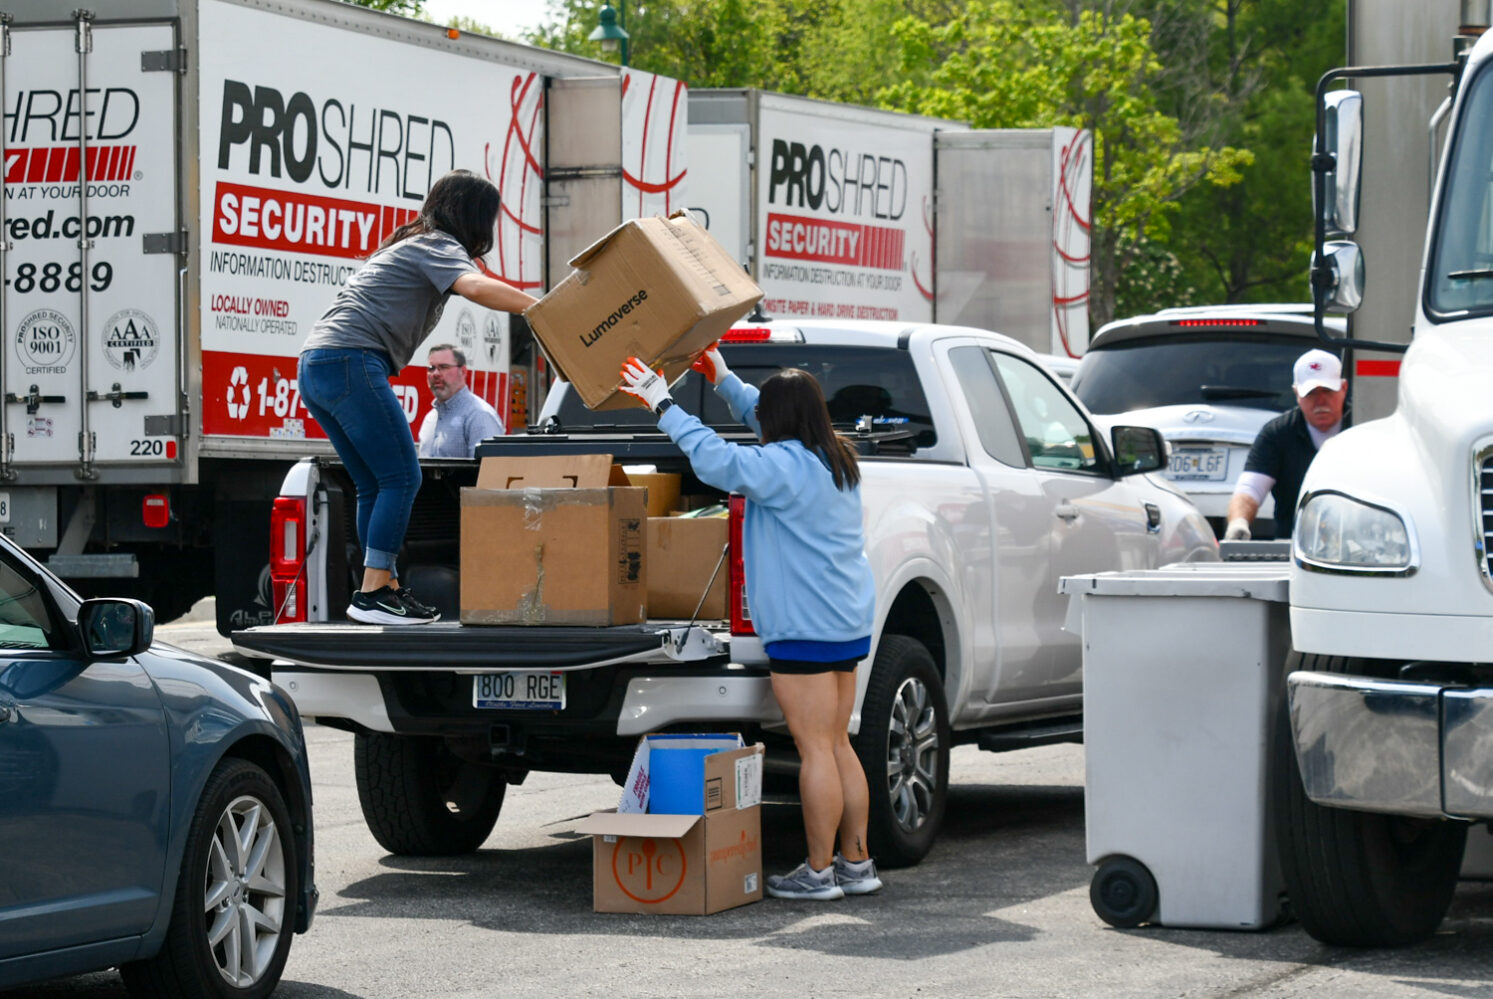 Image description: Volunteers work on unloading a truck at Shred Day 2023.